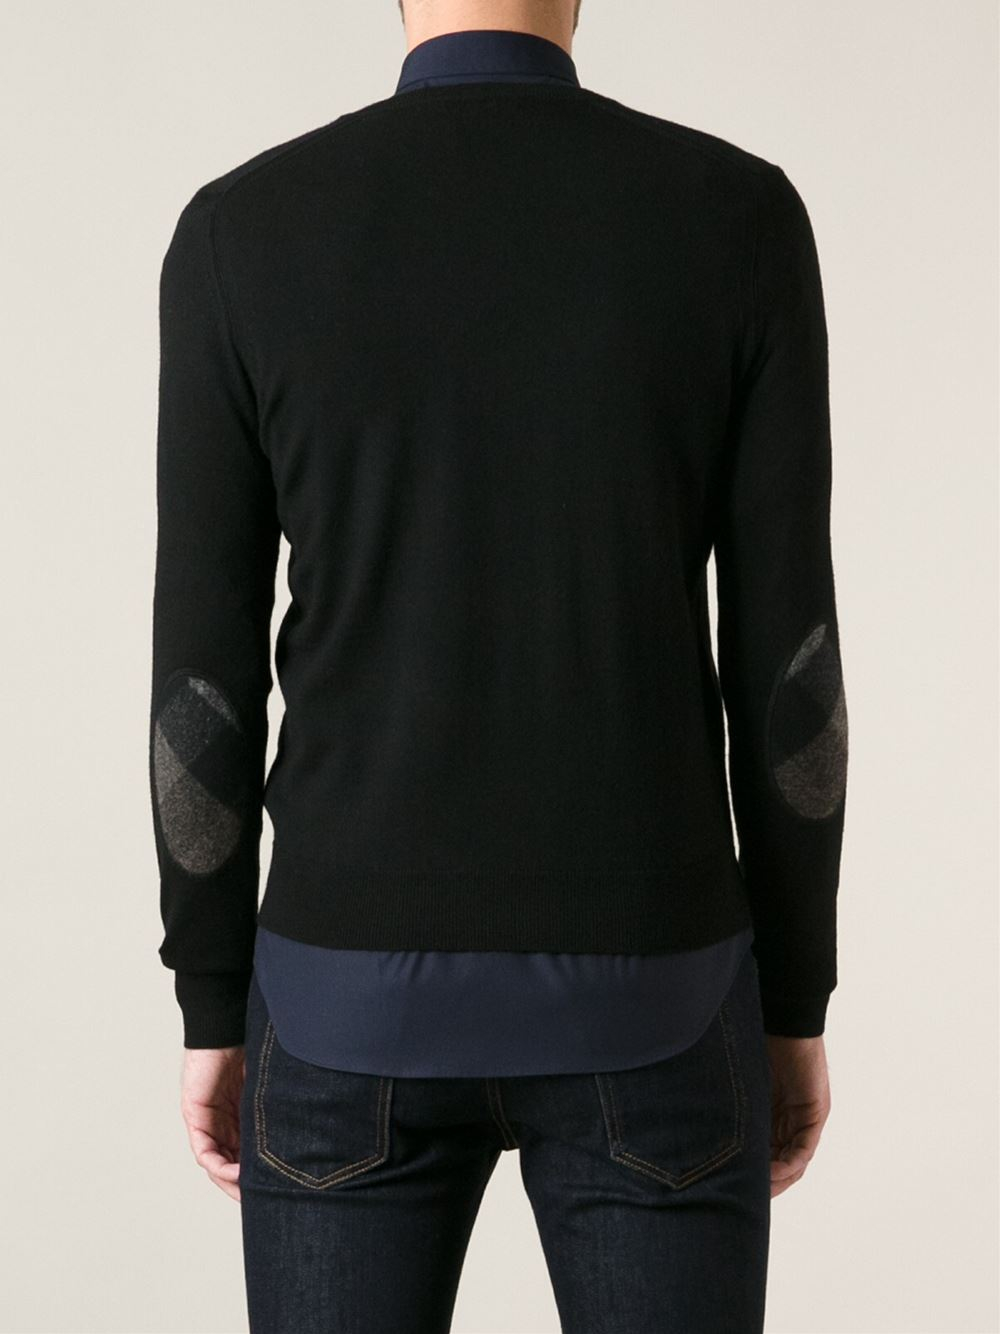 Style burberry mens sweater with elbow patches pictures